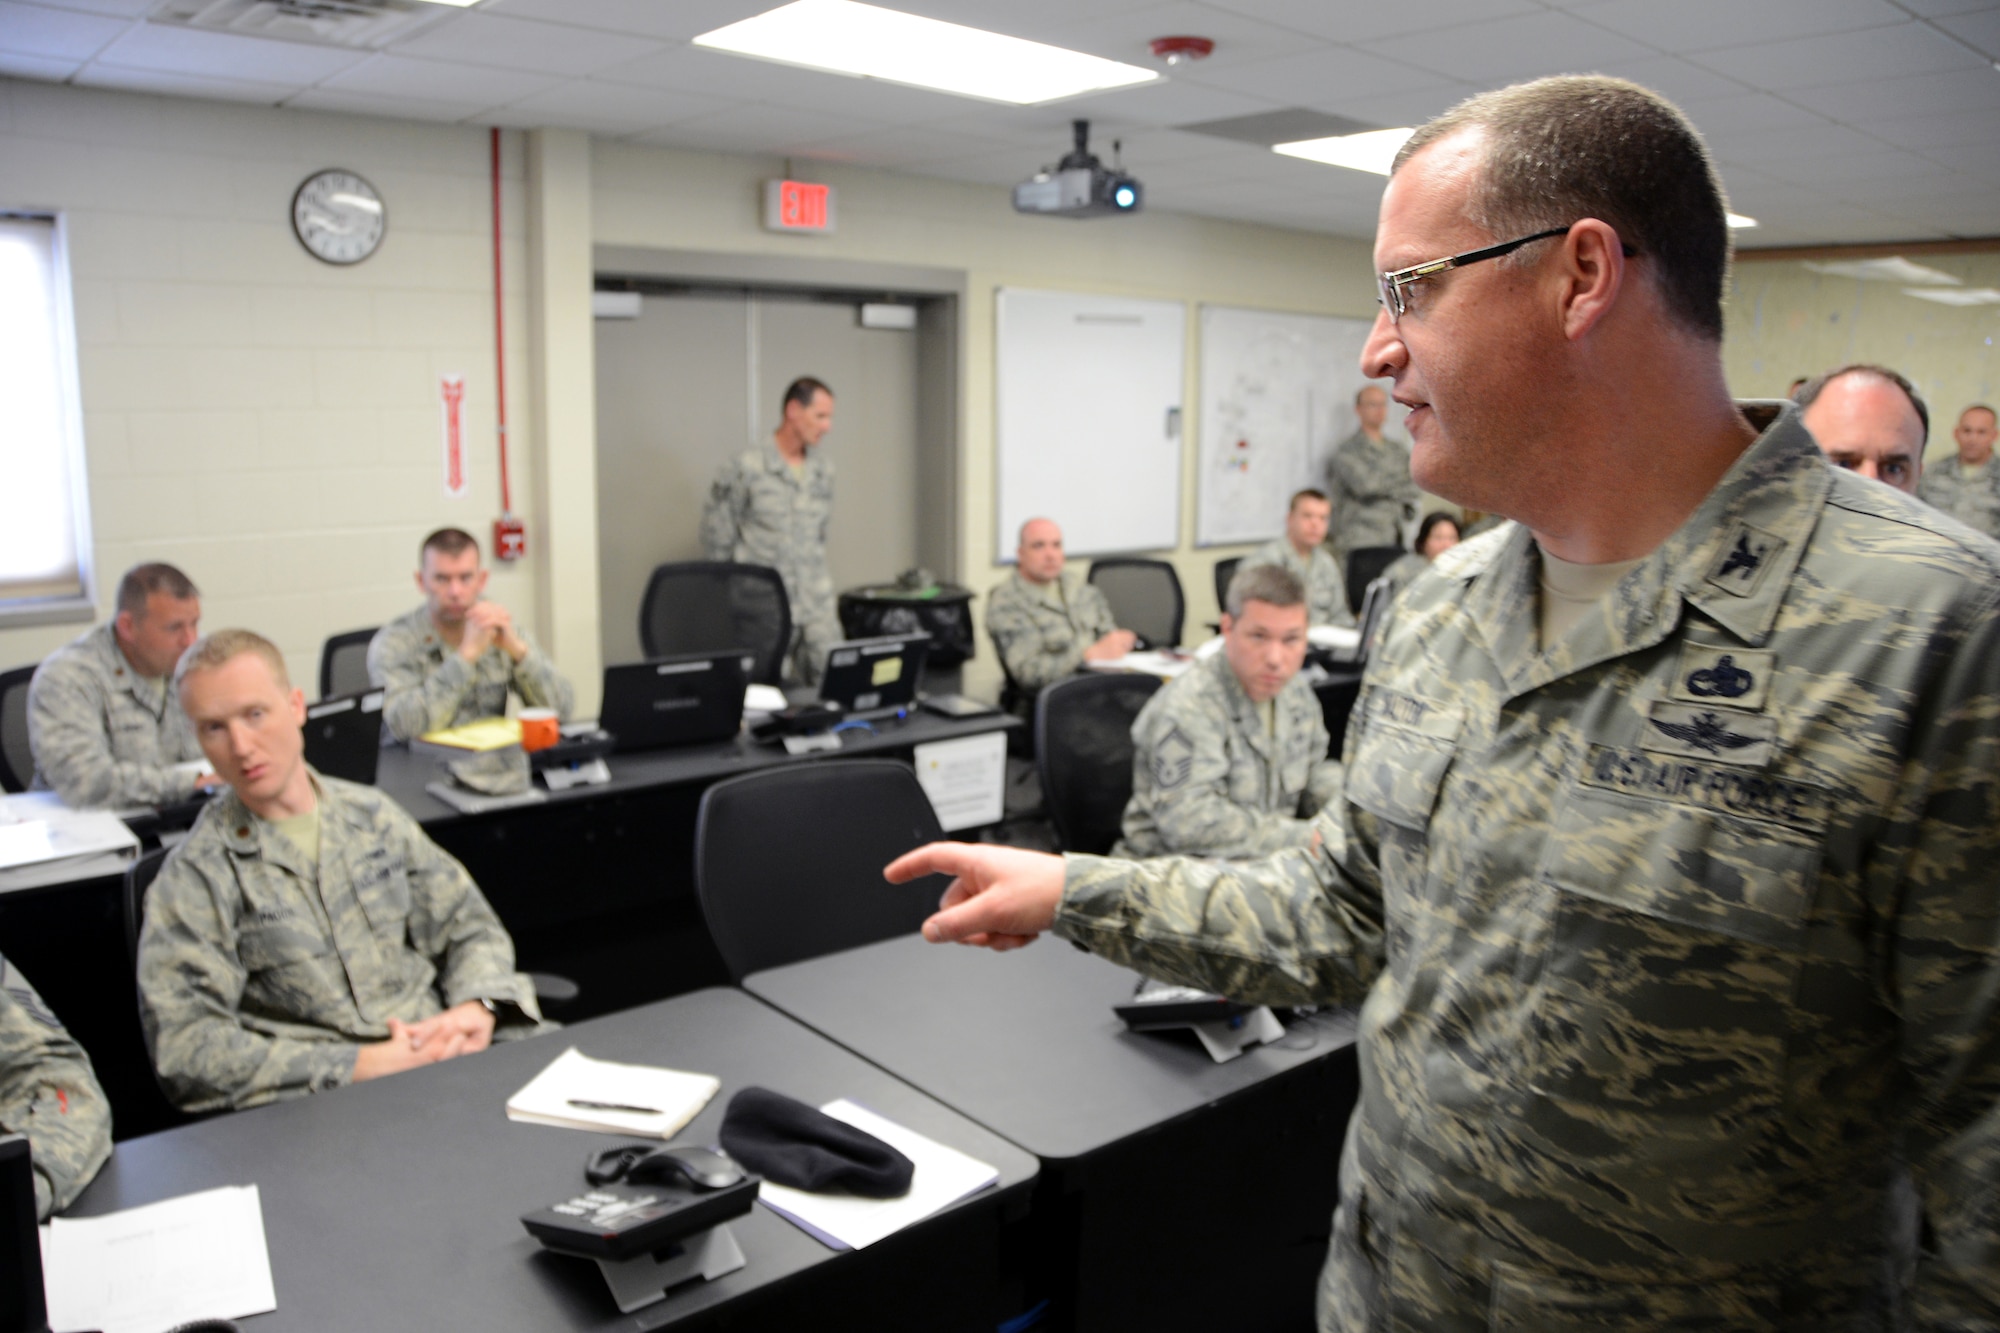 Col. Roy Walton, commander of the 103rd Mission Support Group, walks around the emergency operations center directing individual subject matter experts during a table-top exercise on May 4, 2014, Bradley Air National Guard Base in East Granby, Conn. The exercise was designed to prepare the Connecticut Air National Guard for the upcoming hurricane season, and implement procedural changes and lessons learned from previous exercises and actual emergency response operations. (U.S. Air National Guard photo by Tech. Sgt. Joshua Mead)